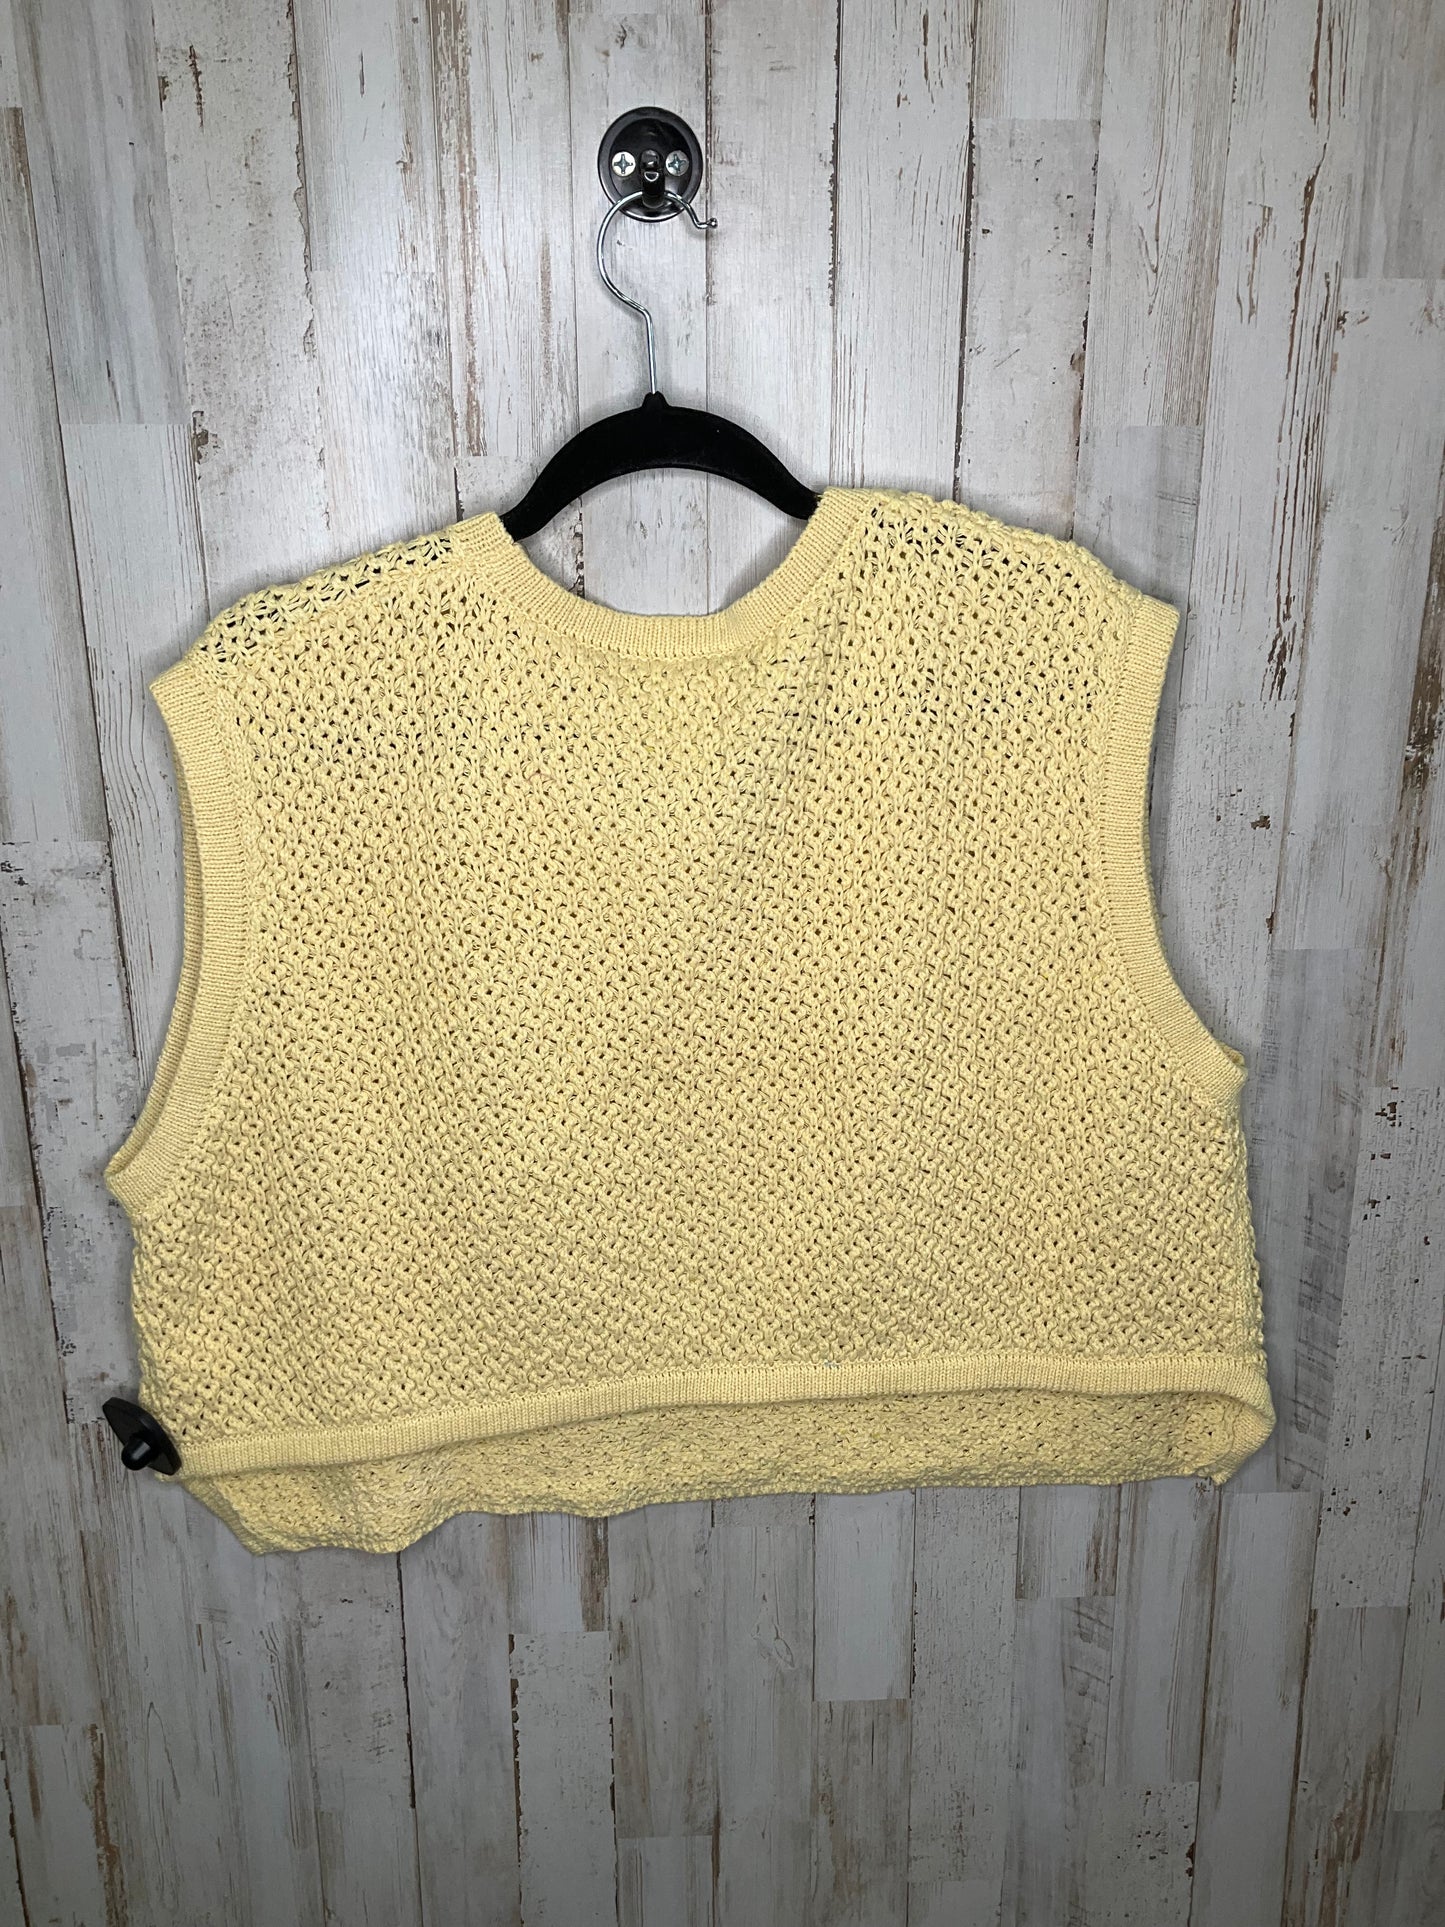 Vest Sweater By Altard State  Size: 1x